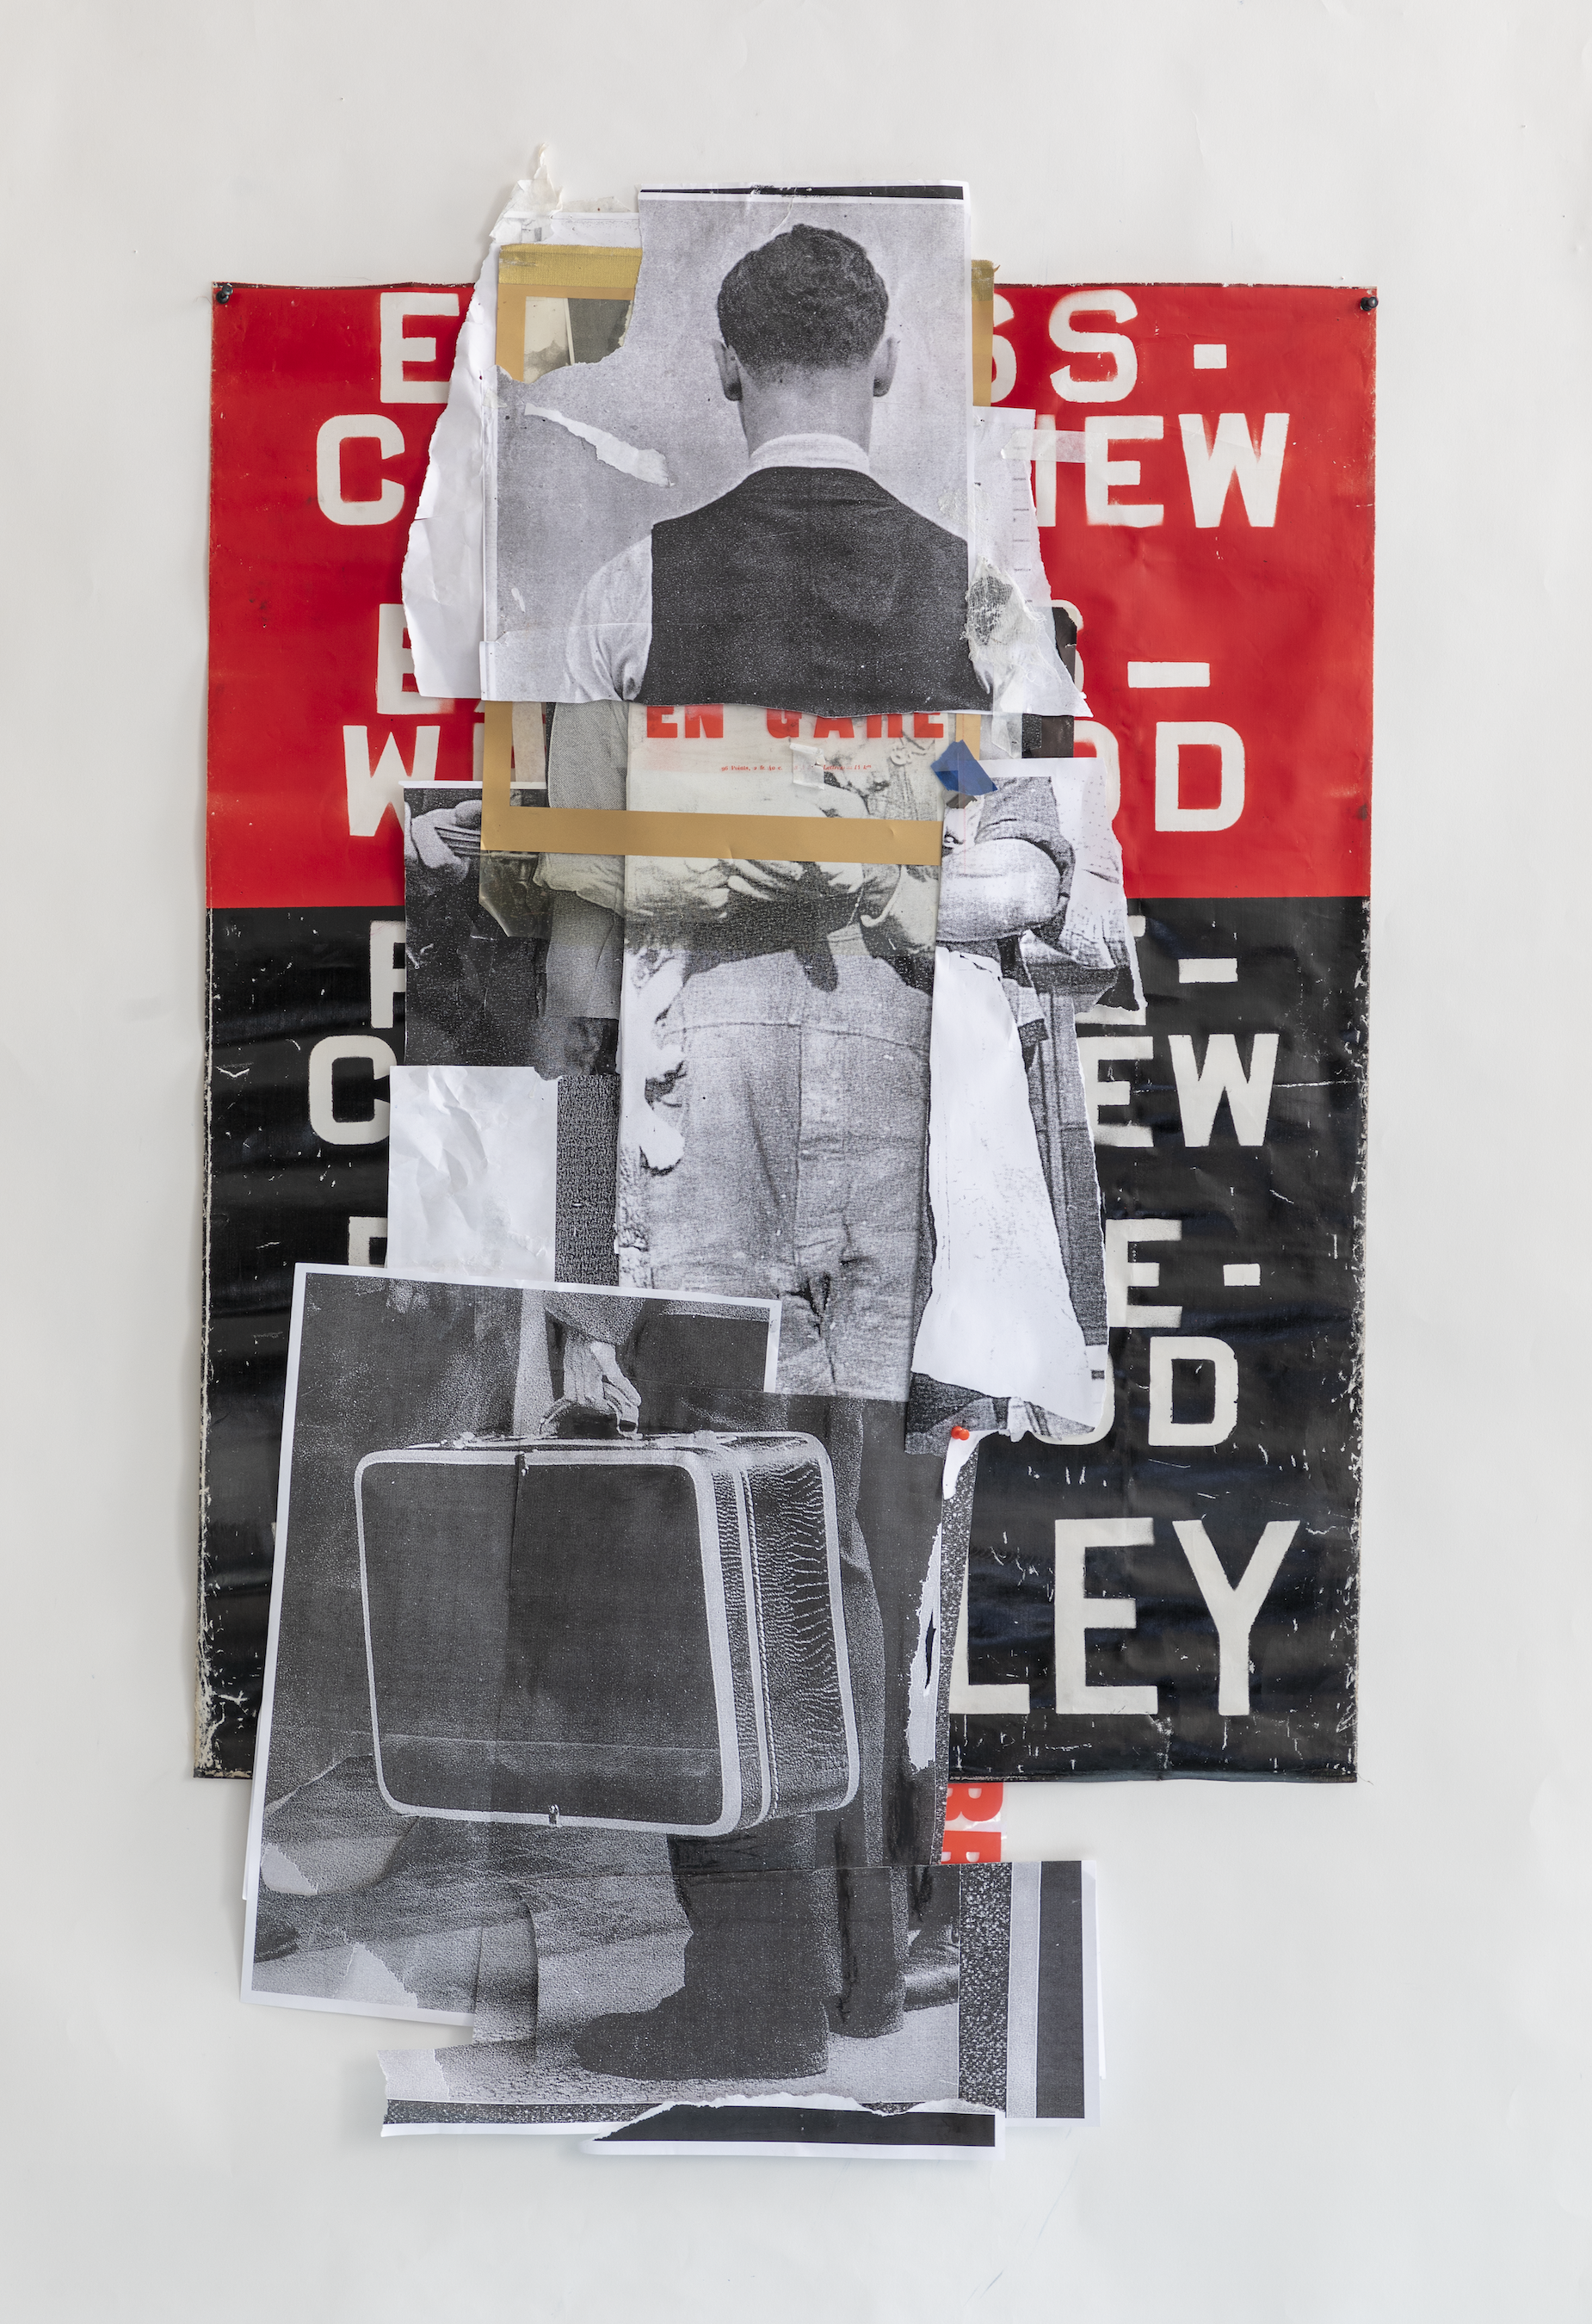 Angela Grossmann, Work, 2021, Mixed Media on Paper, 48 x 31 inches, $10,500